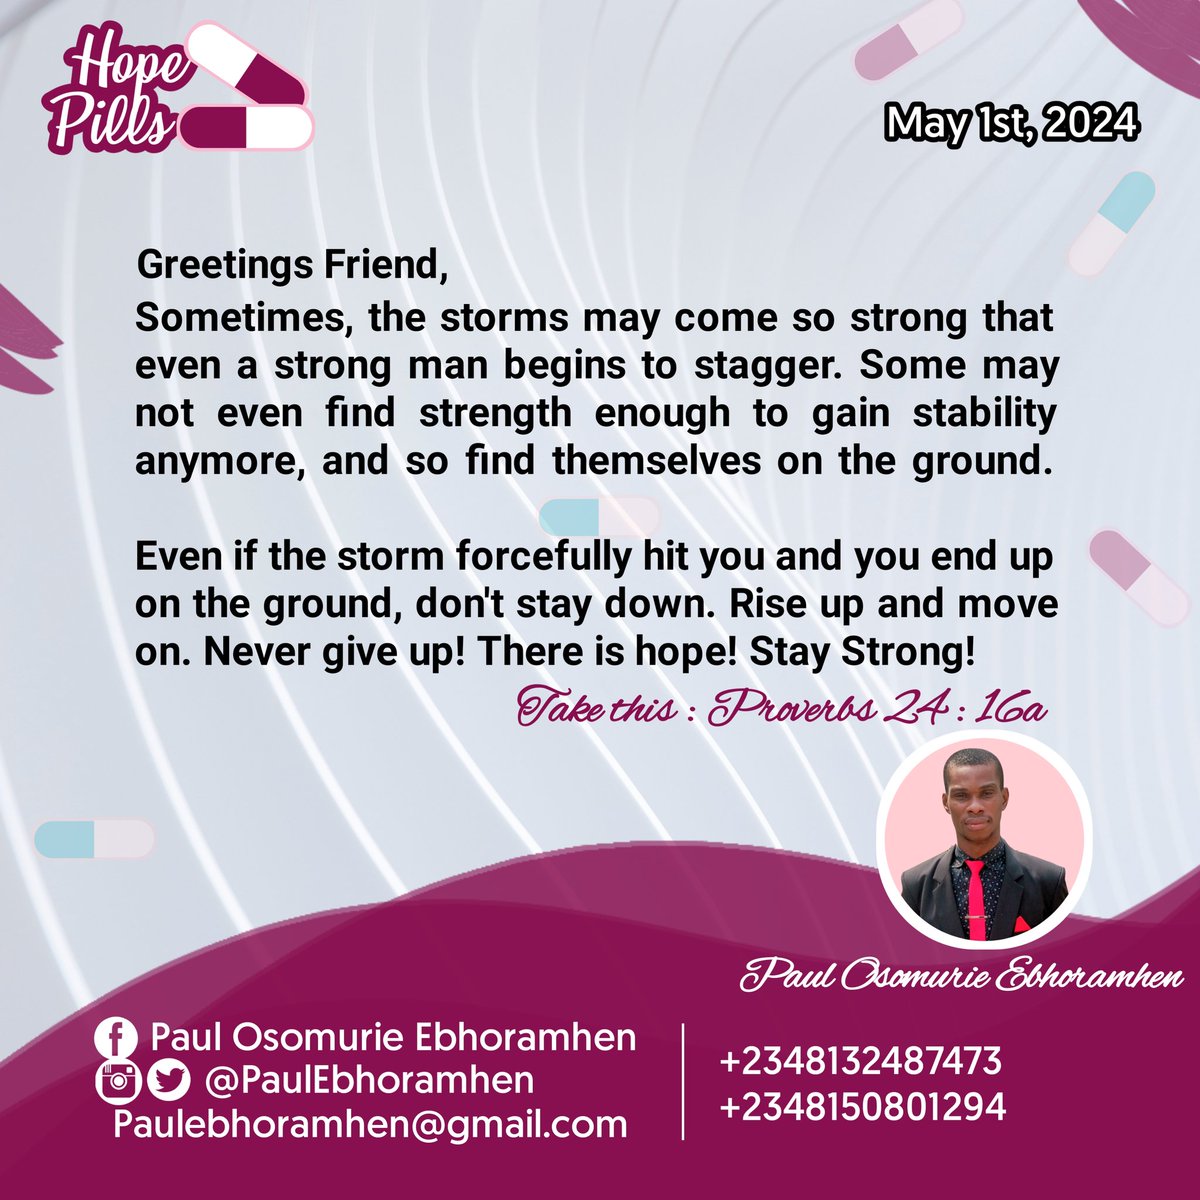 The storms do not determine your destiny. Don't let them place you permanently on the ground of life.

#HopePills
#HopeSpeaks
#HopeForTheHopeless 
#ThereIsHope 
#StayStrong